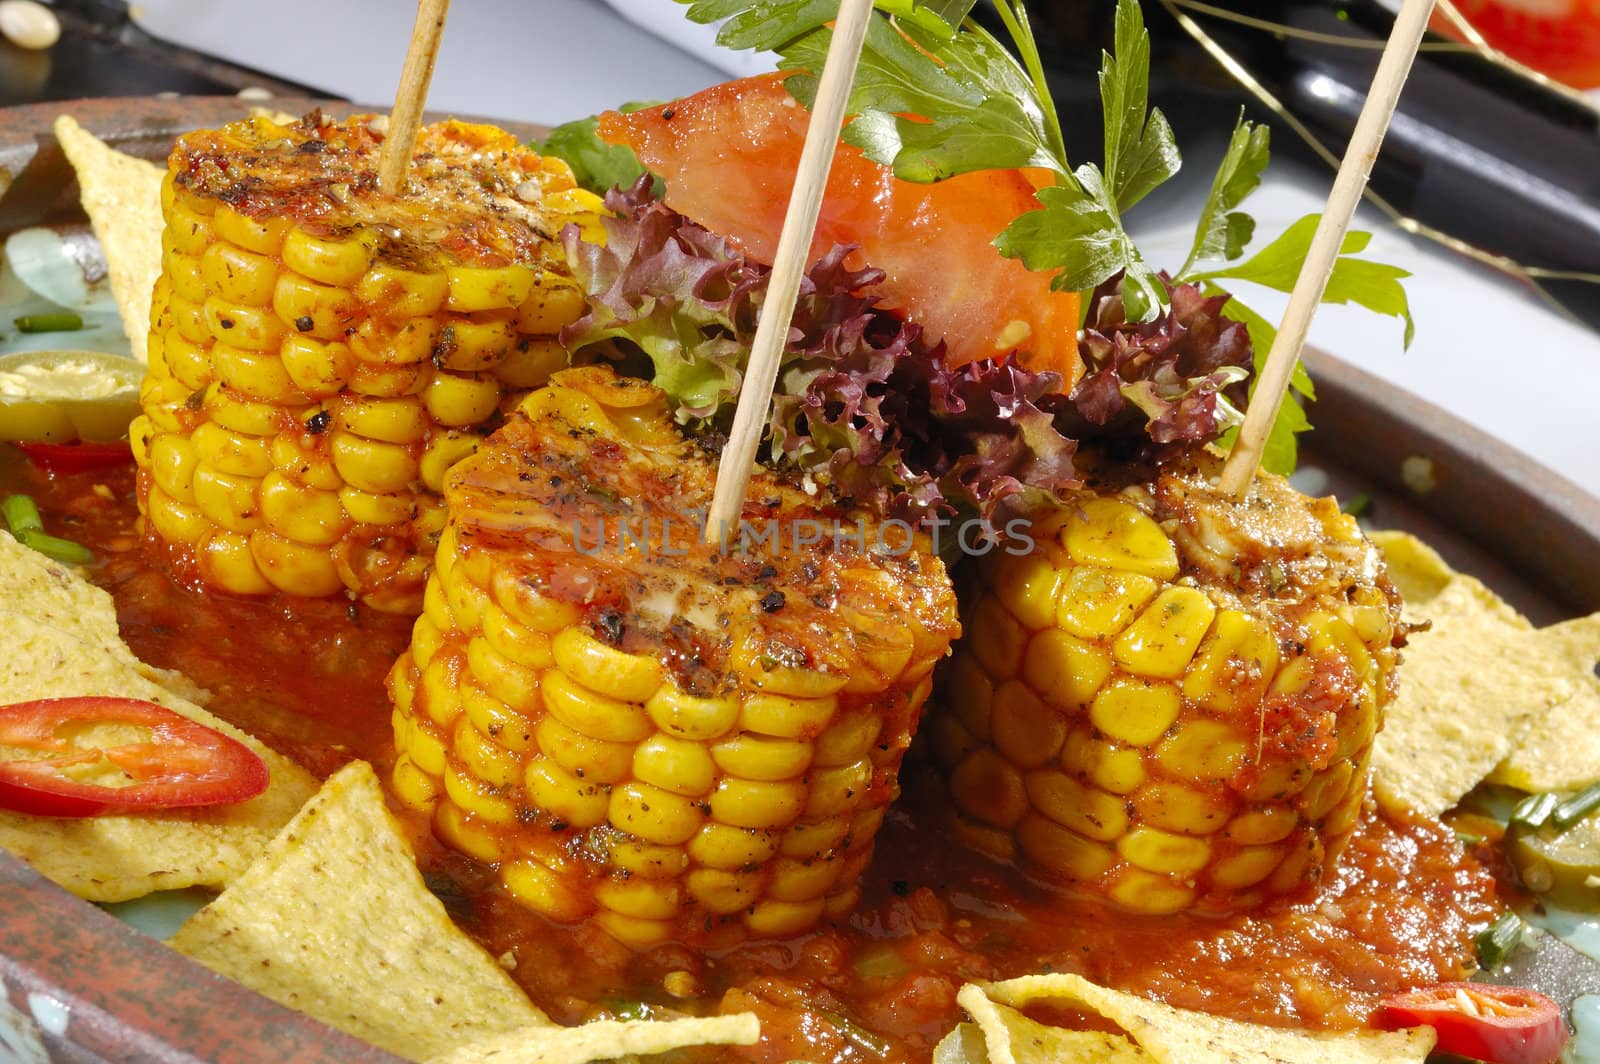 Baked corn with salsa by hanusst